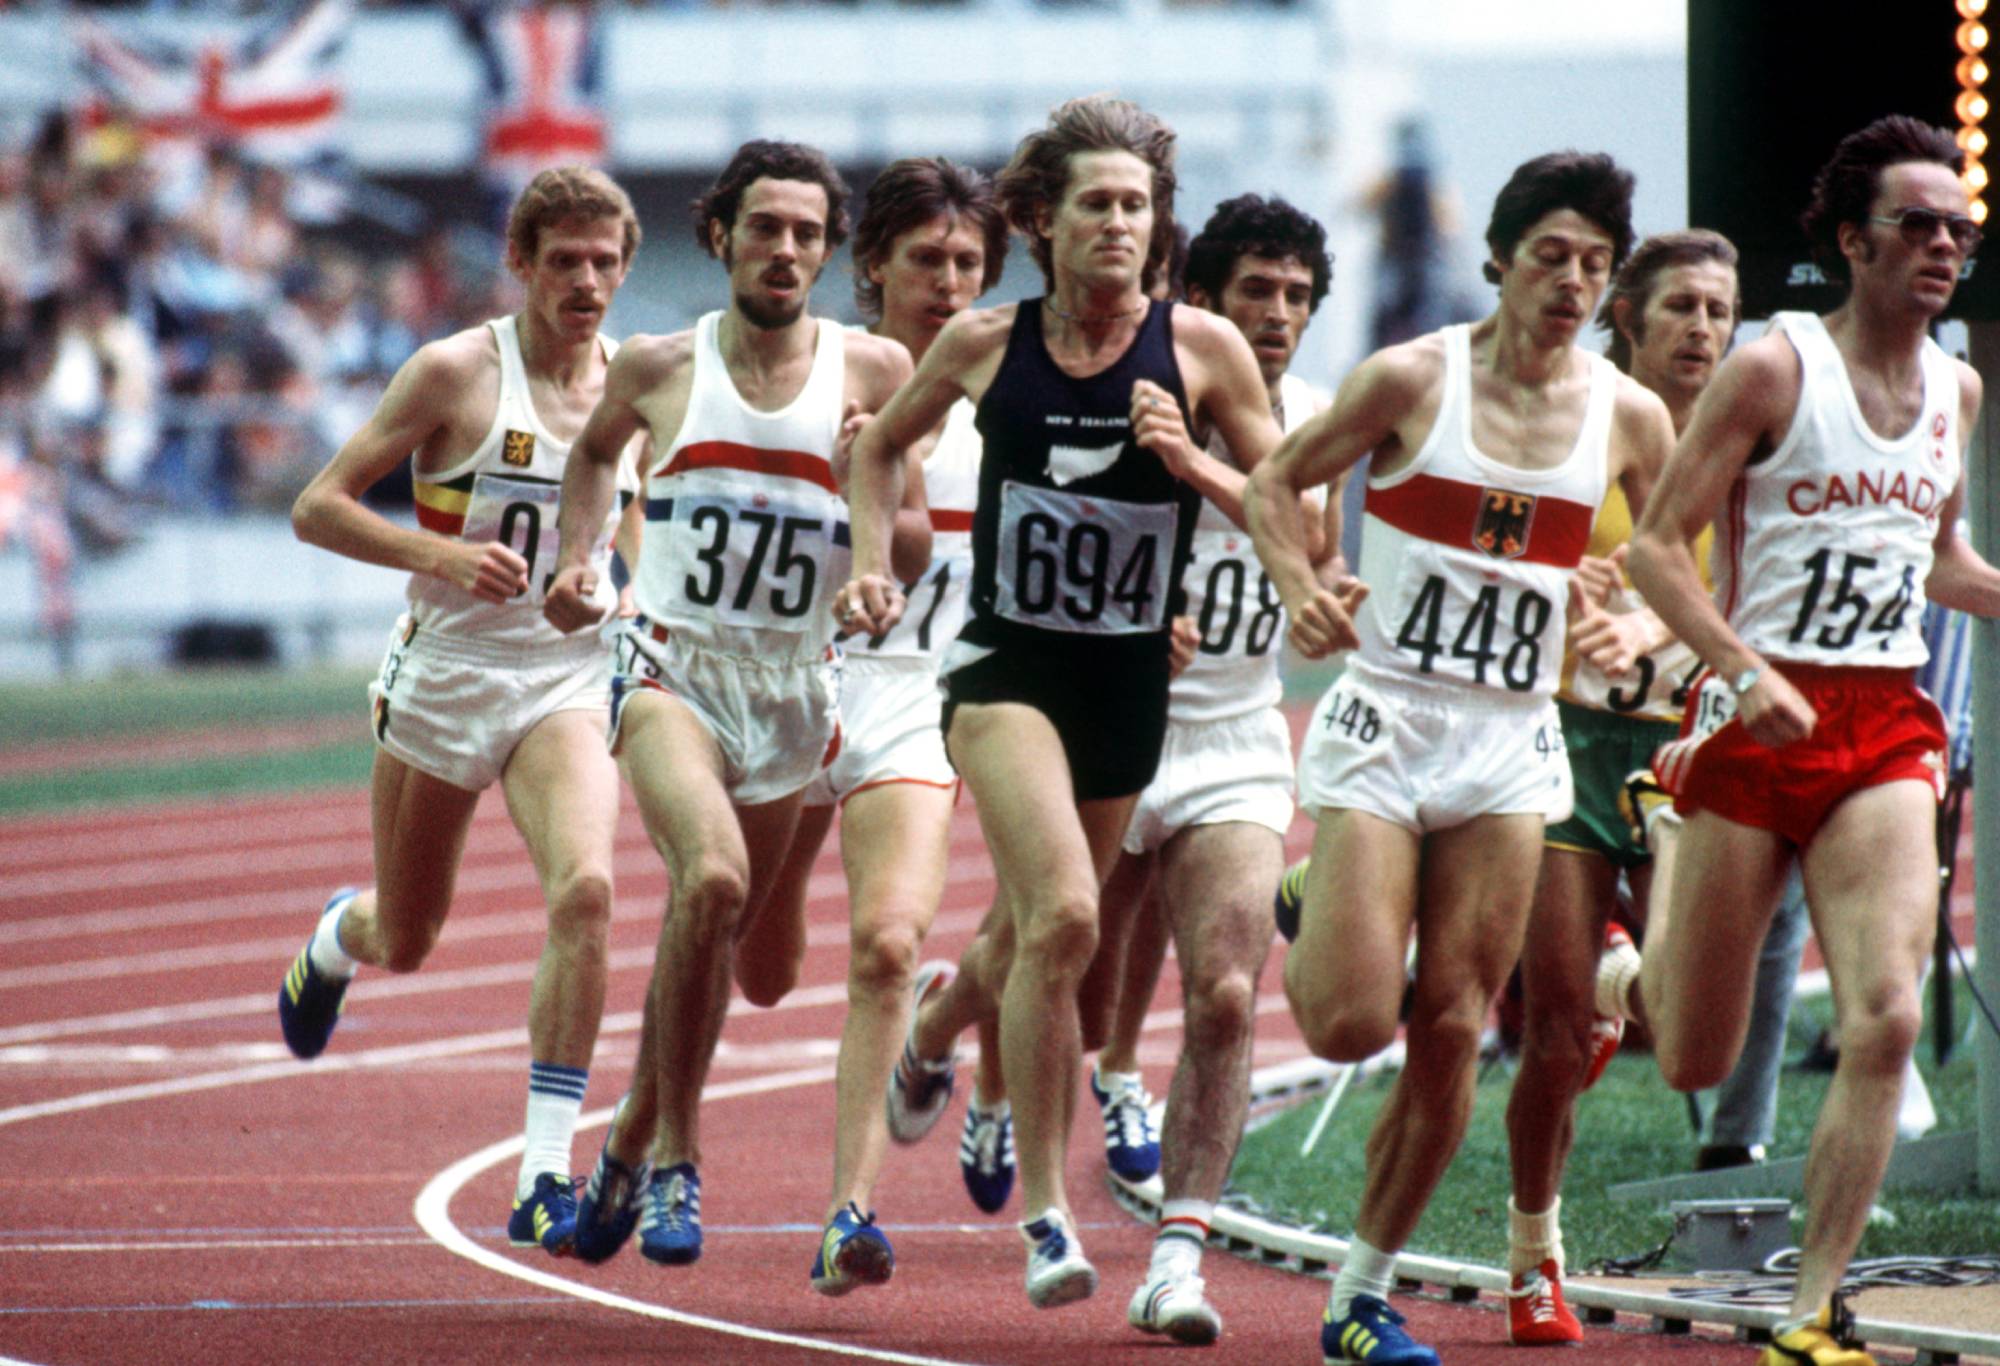 New Zealand's John Walker (694), Great Britain's Steve Ovett (375) and West Germany's Thomas Wessinghage (448) in action (Photo by S&G/PA Images via Getty Images)